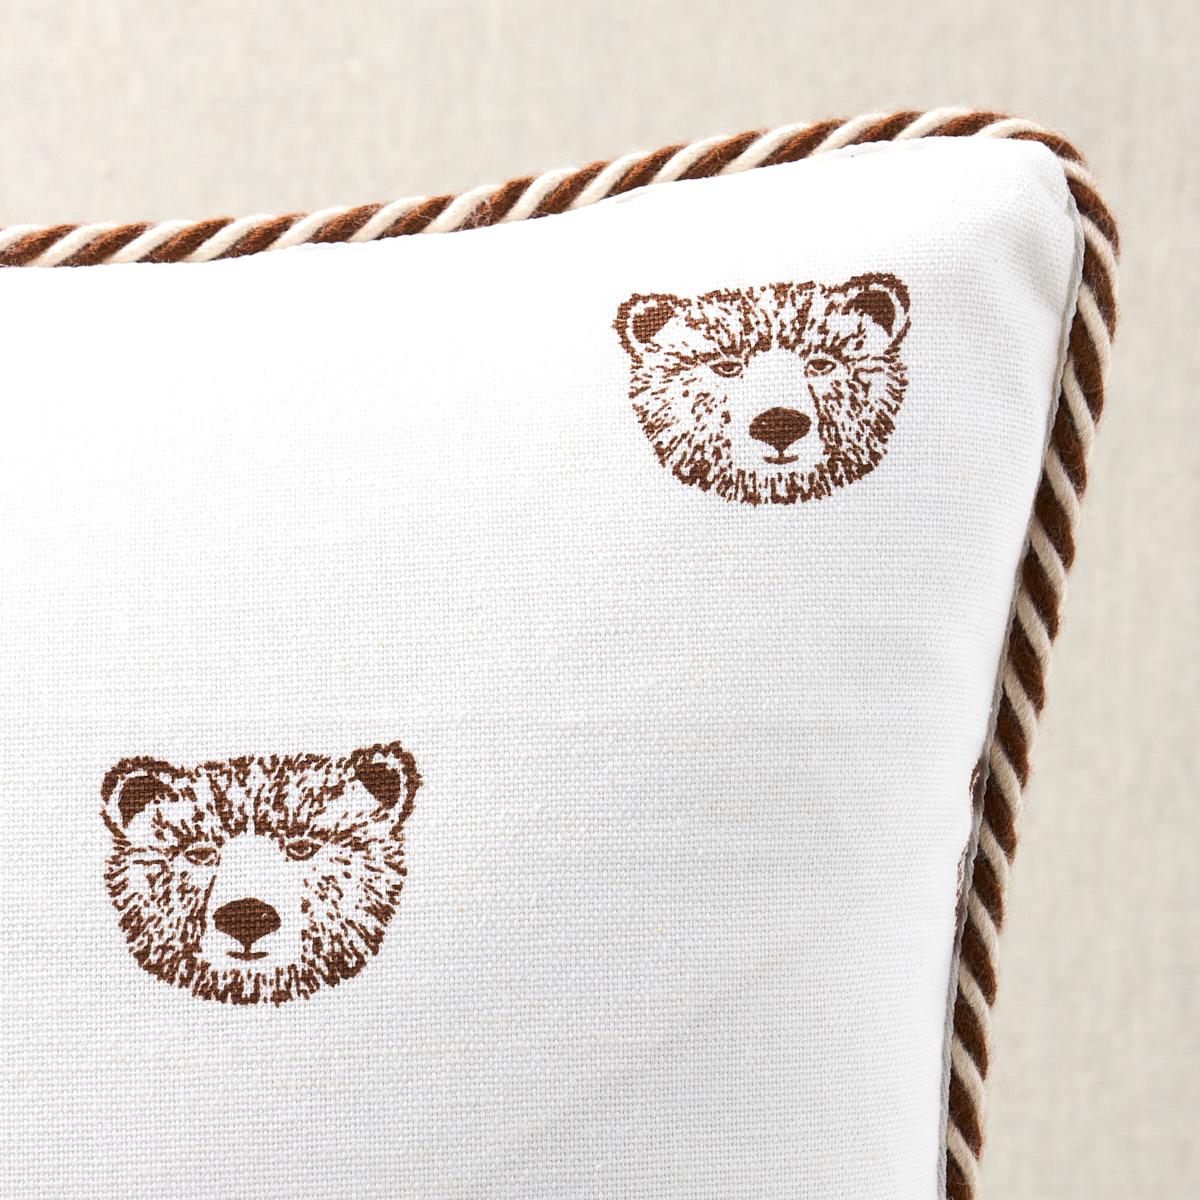 This pillow features Bear High Performance Print by Marie-Chantal of Greece for Schumacher. Marie-Chantal’s Bear High Performance Print in ivory is a small-scale ursine pattern on a cotton-linen ground. Pillow is finished with a welt in Capri